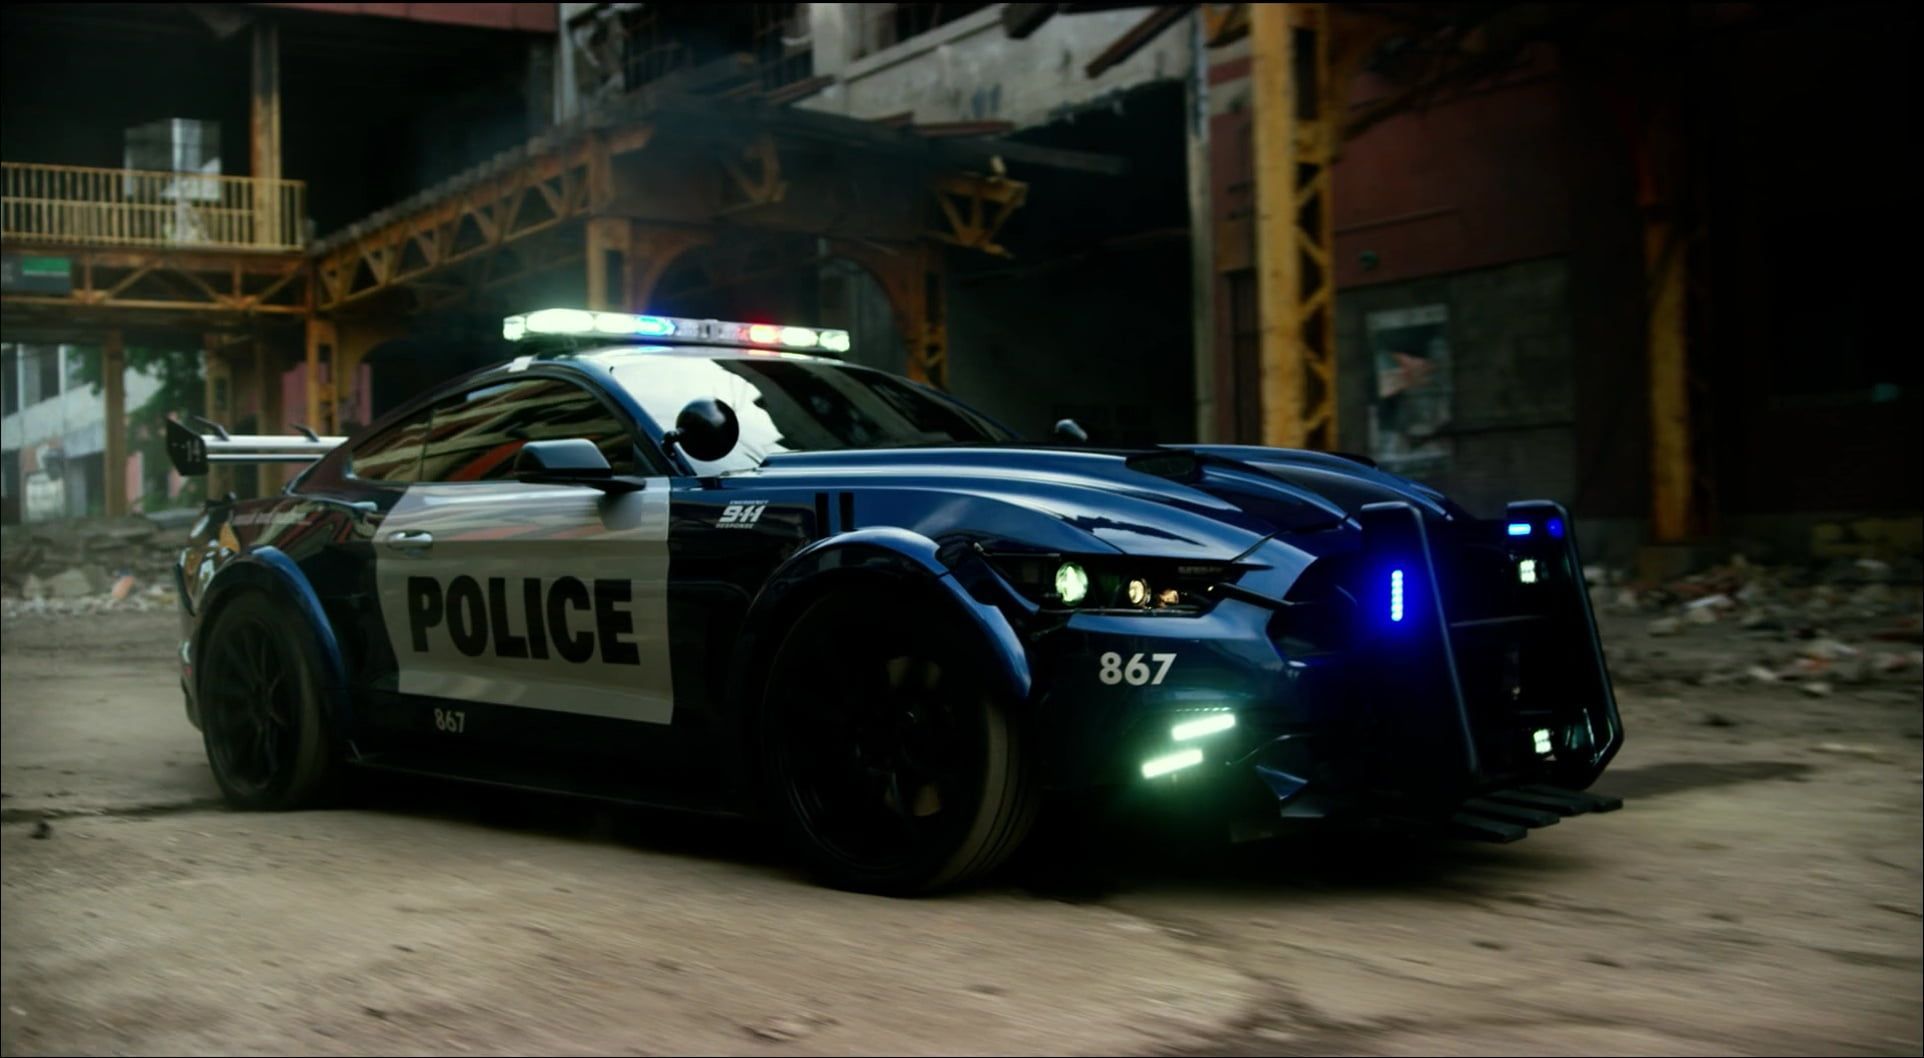 blue and white police car #police #car #Ford #Transformers Ford Mustang transformers: the last knight P #wallpaper #hdwallpa. Ford mustang, Mustang, Car ford